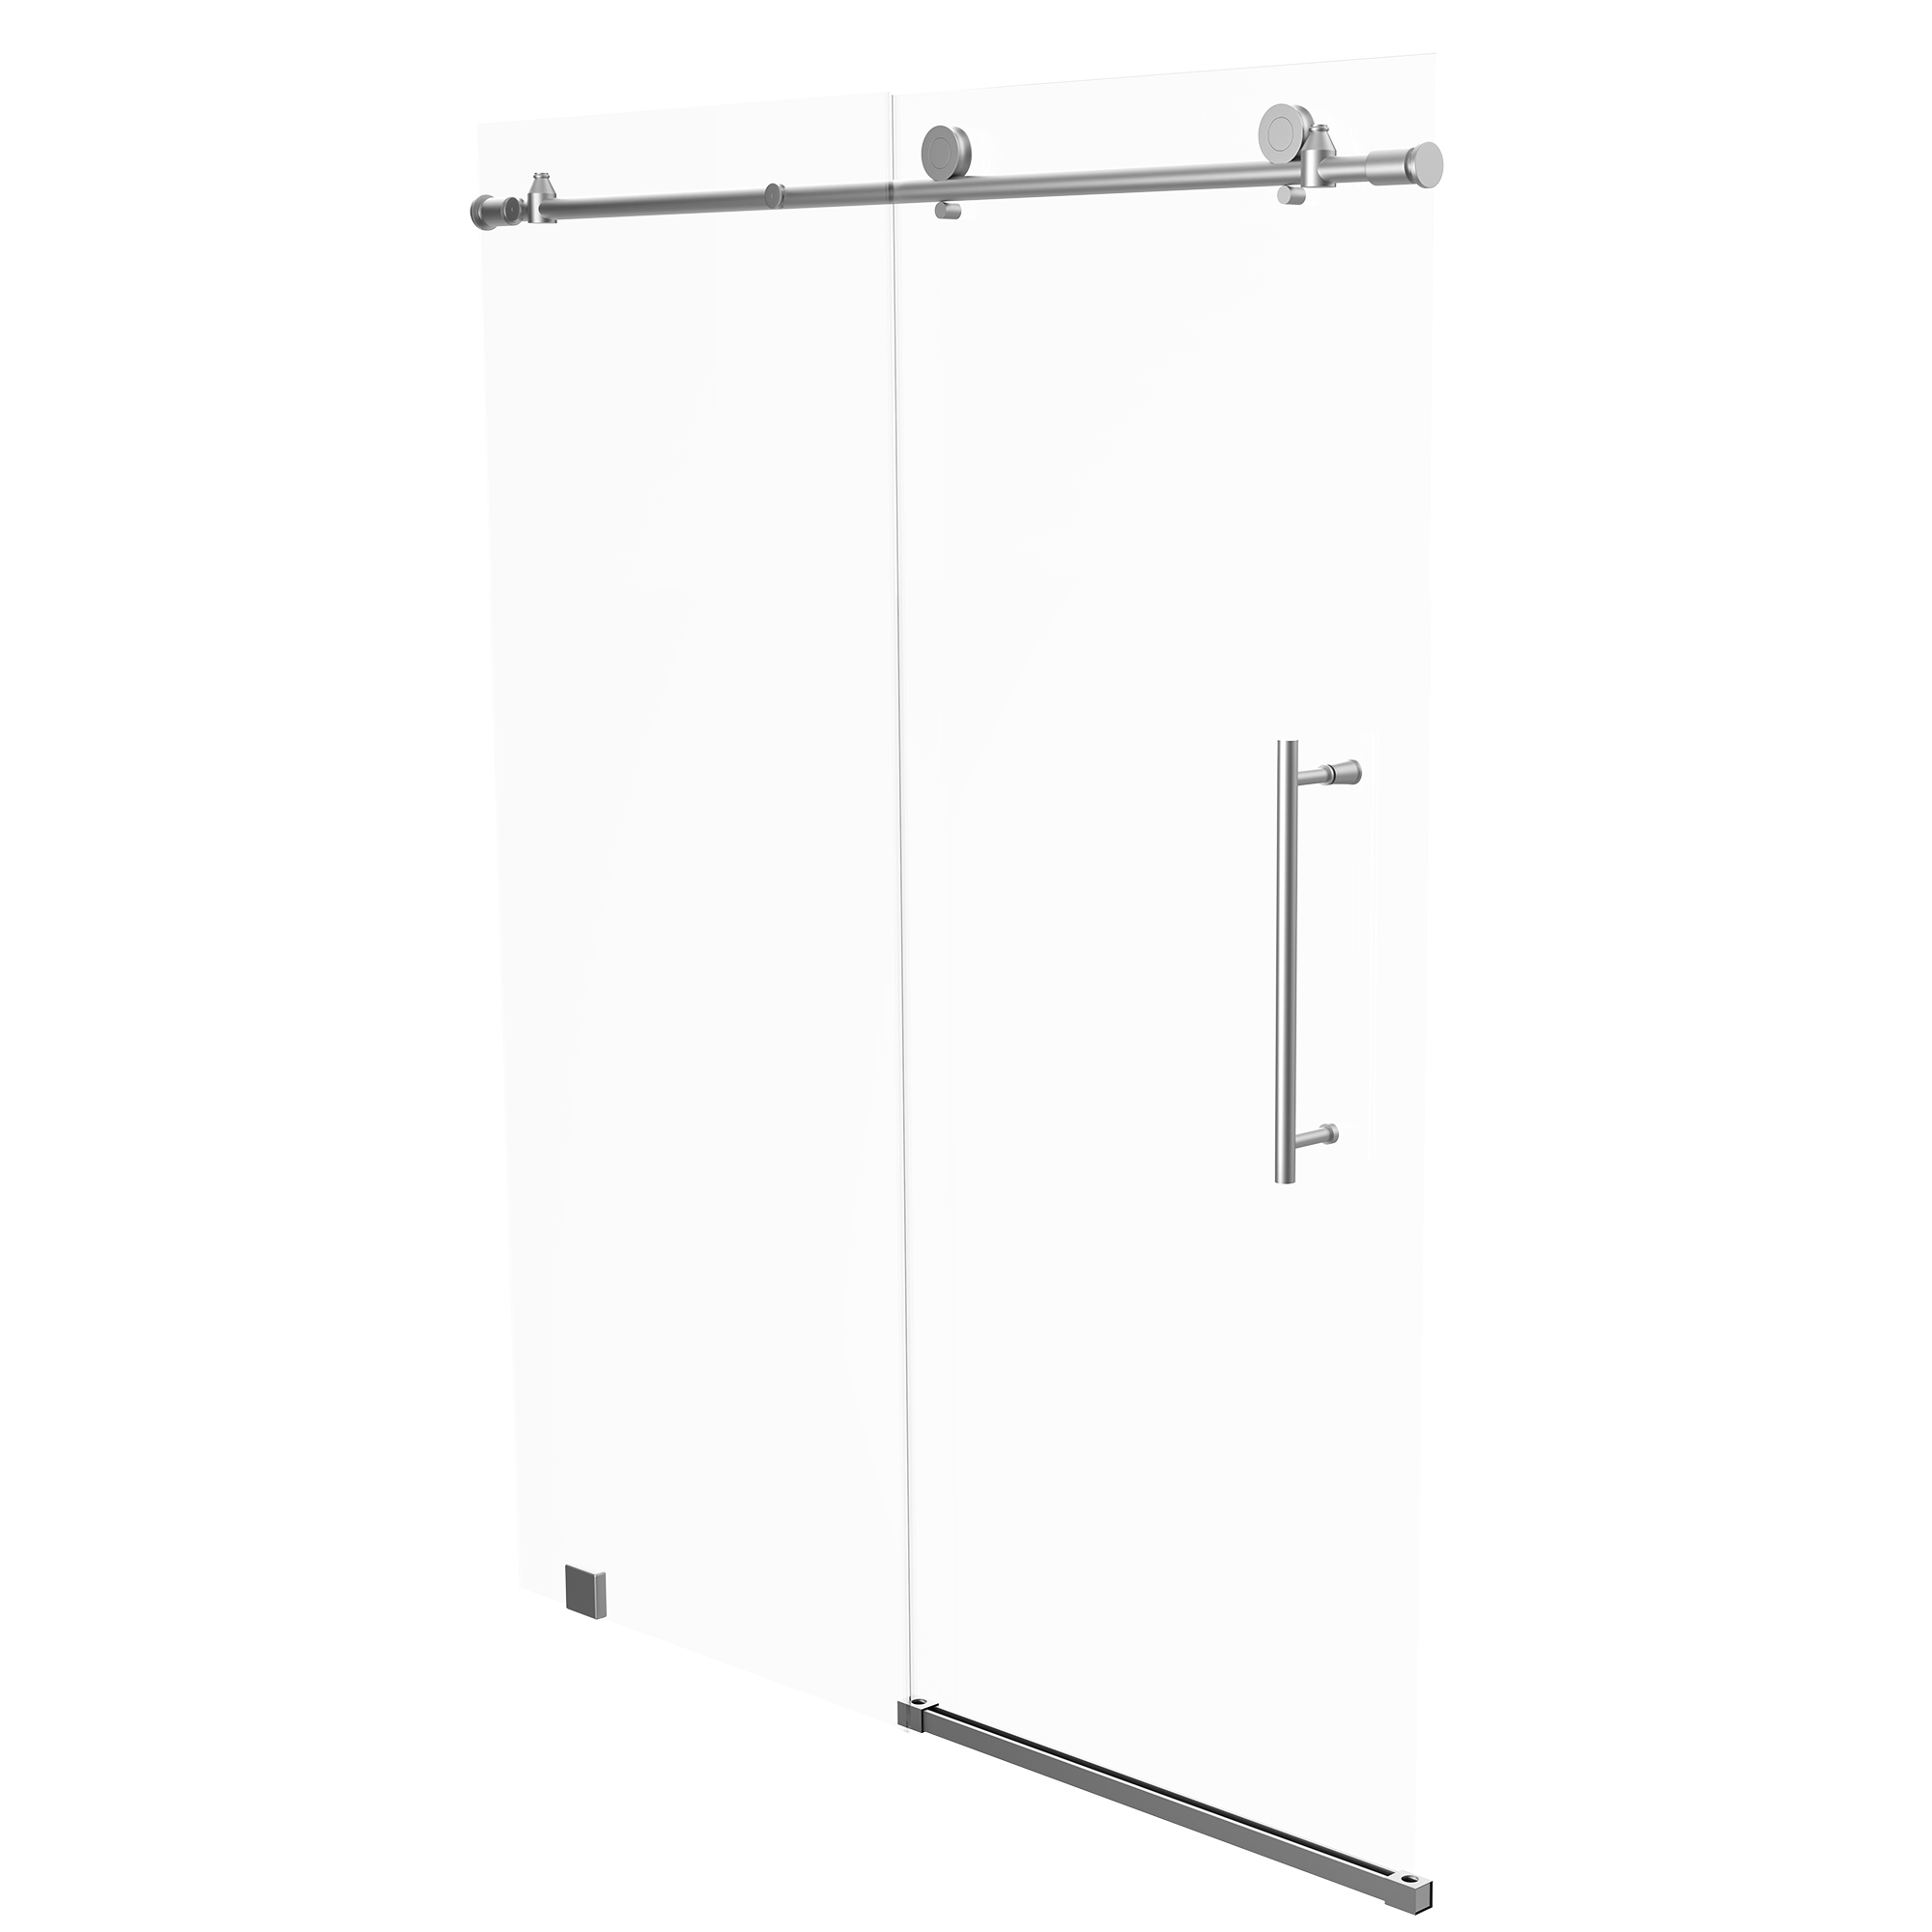 60" x 76" Frameless Shower Door - Acrylic Shower Pan with Drain - Shower Kit with 5pc Shower Wall System